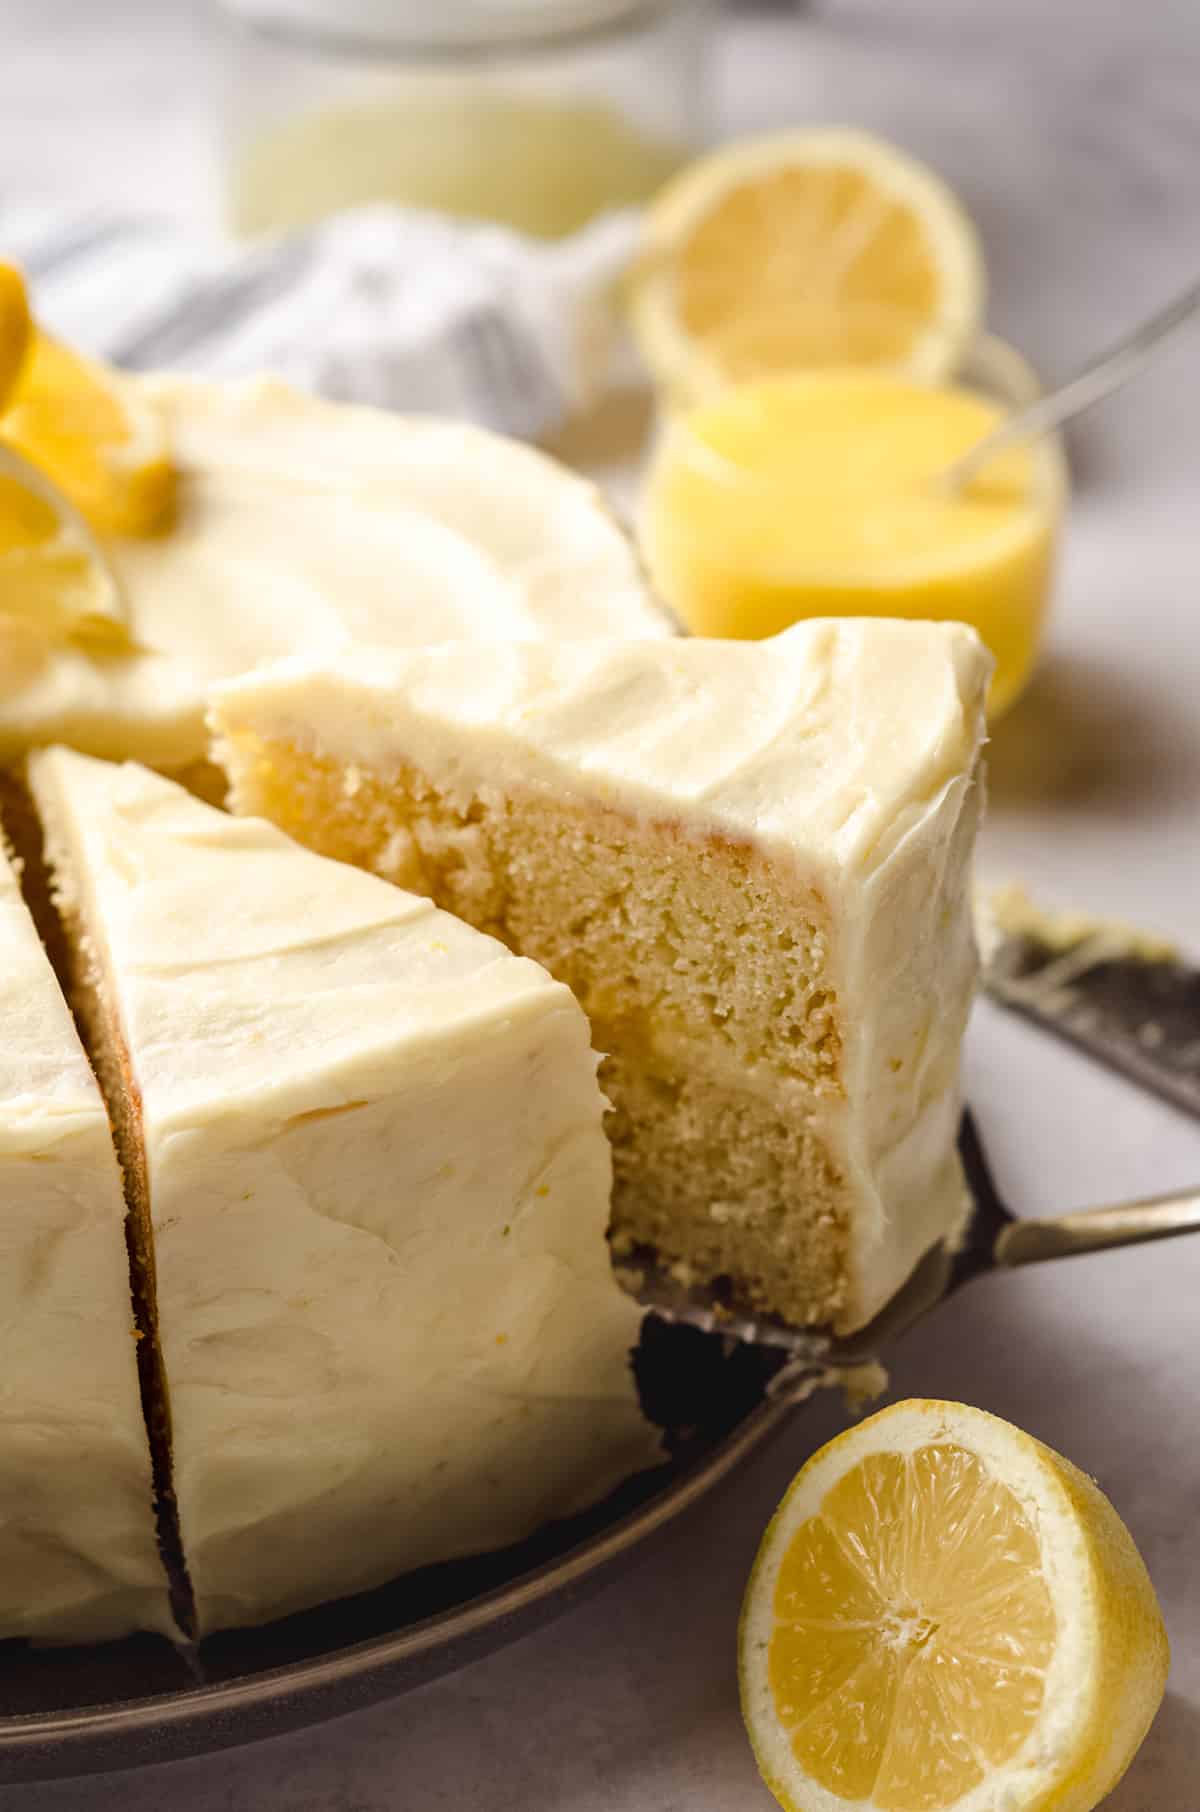 Removing a slice of lemon cake from an intact cake.